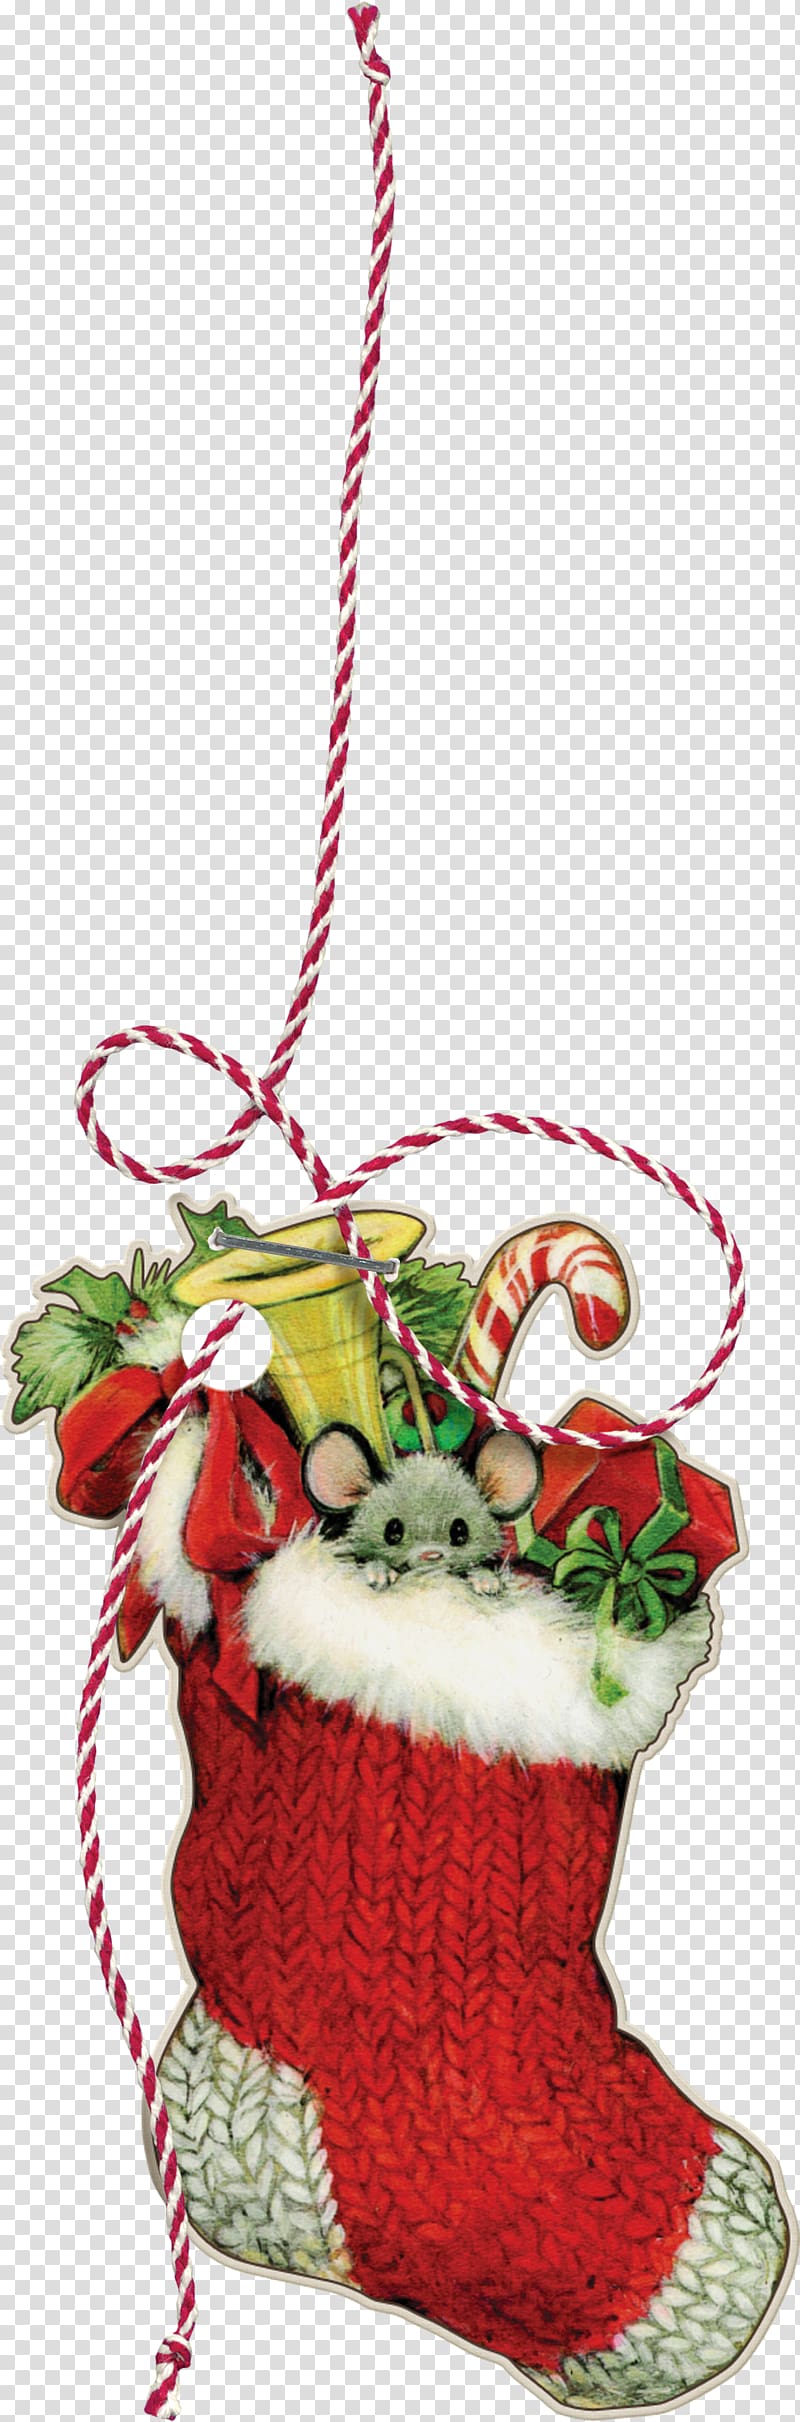 Christmas ornament, Christmas socks transparent background PNG clipart